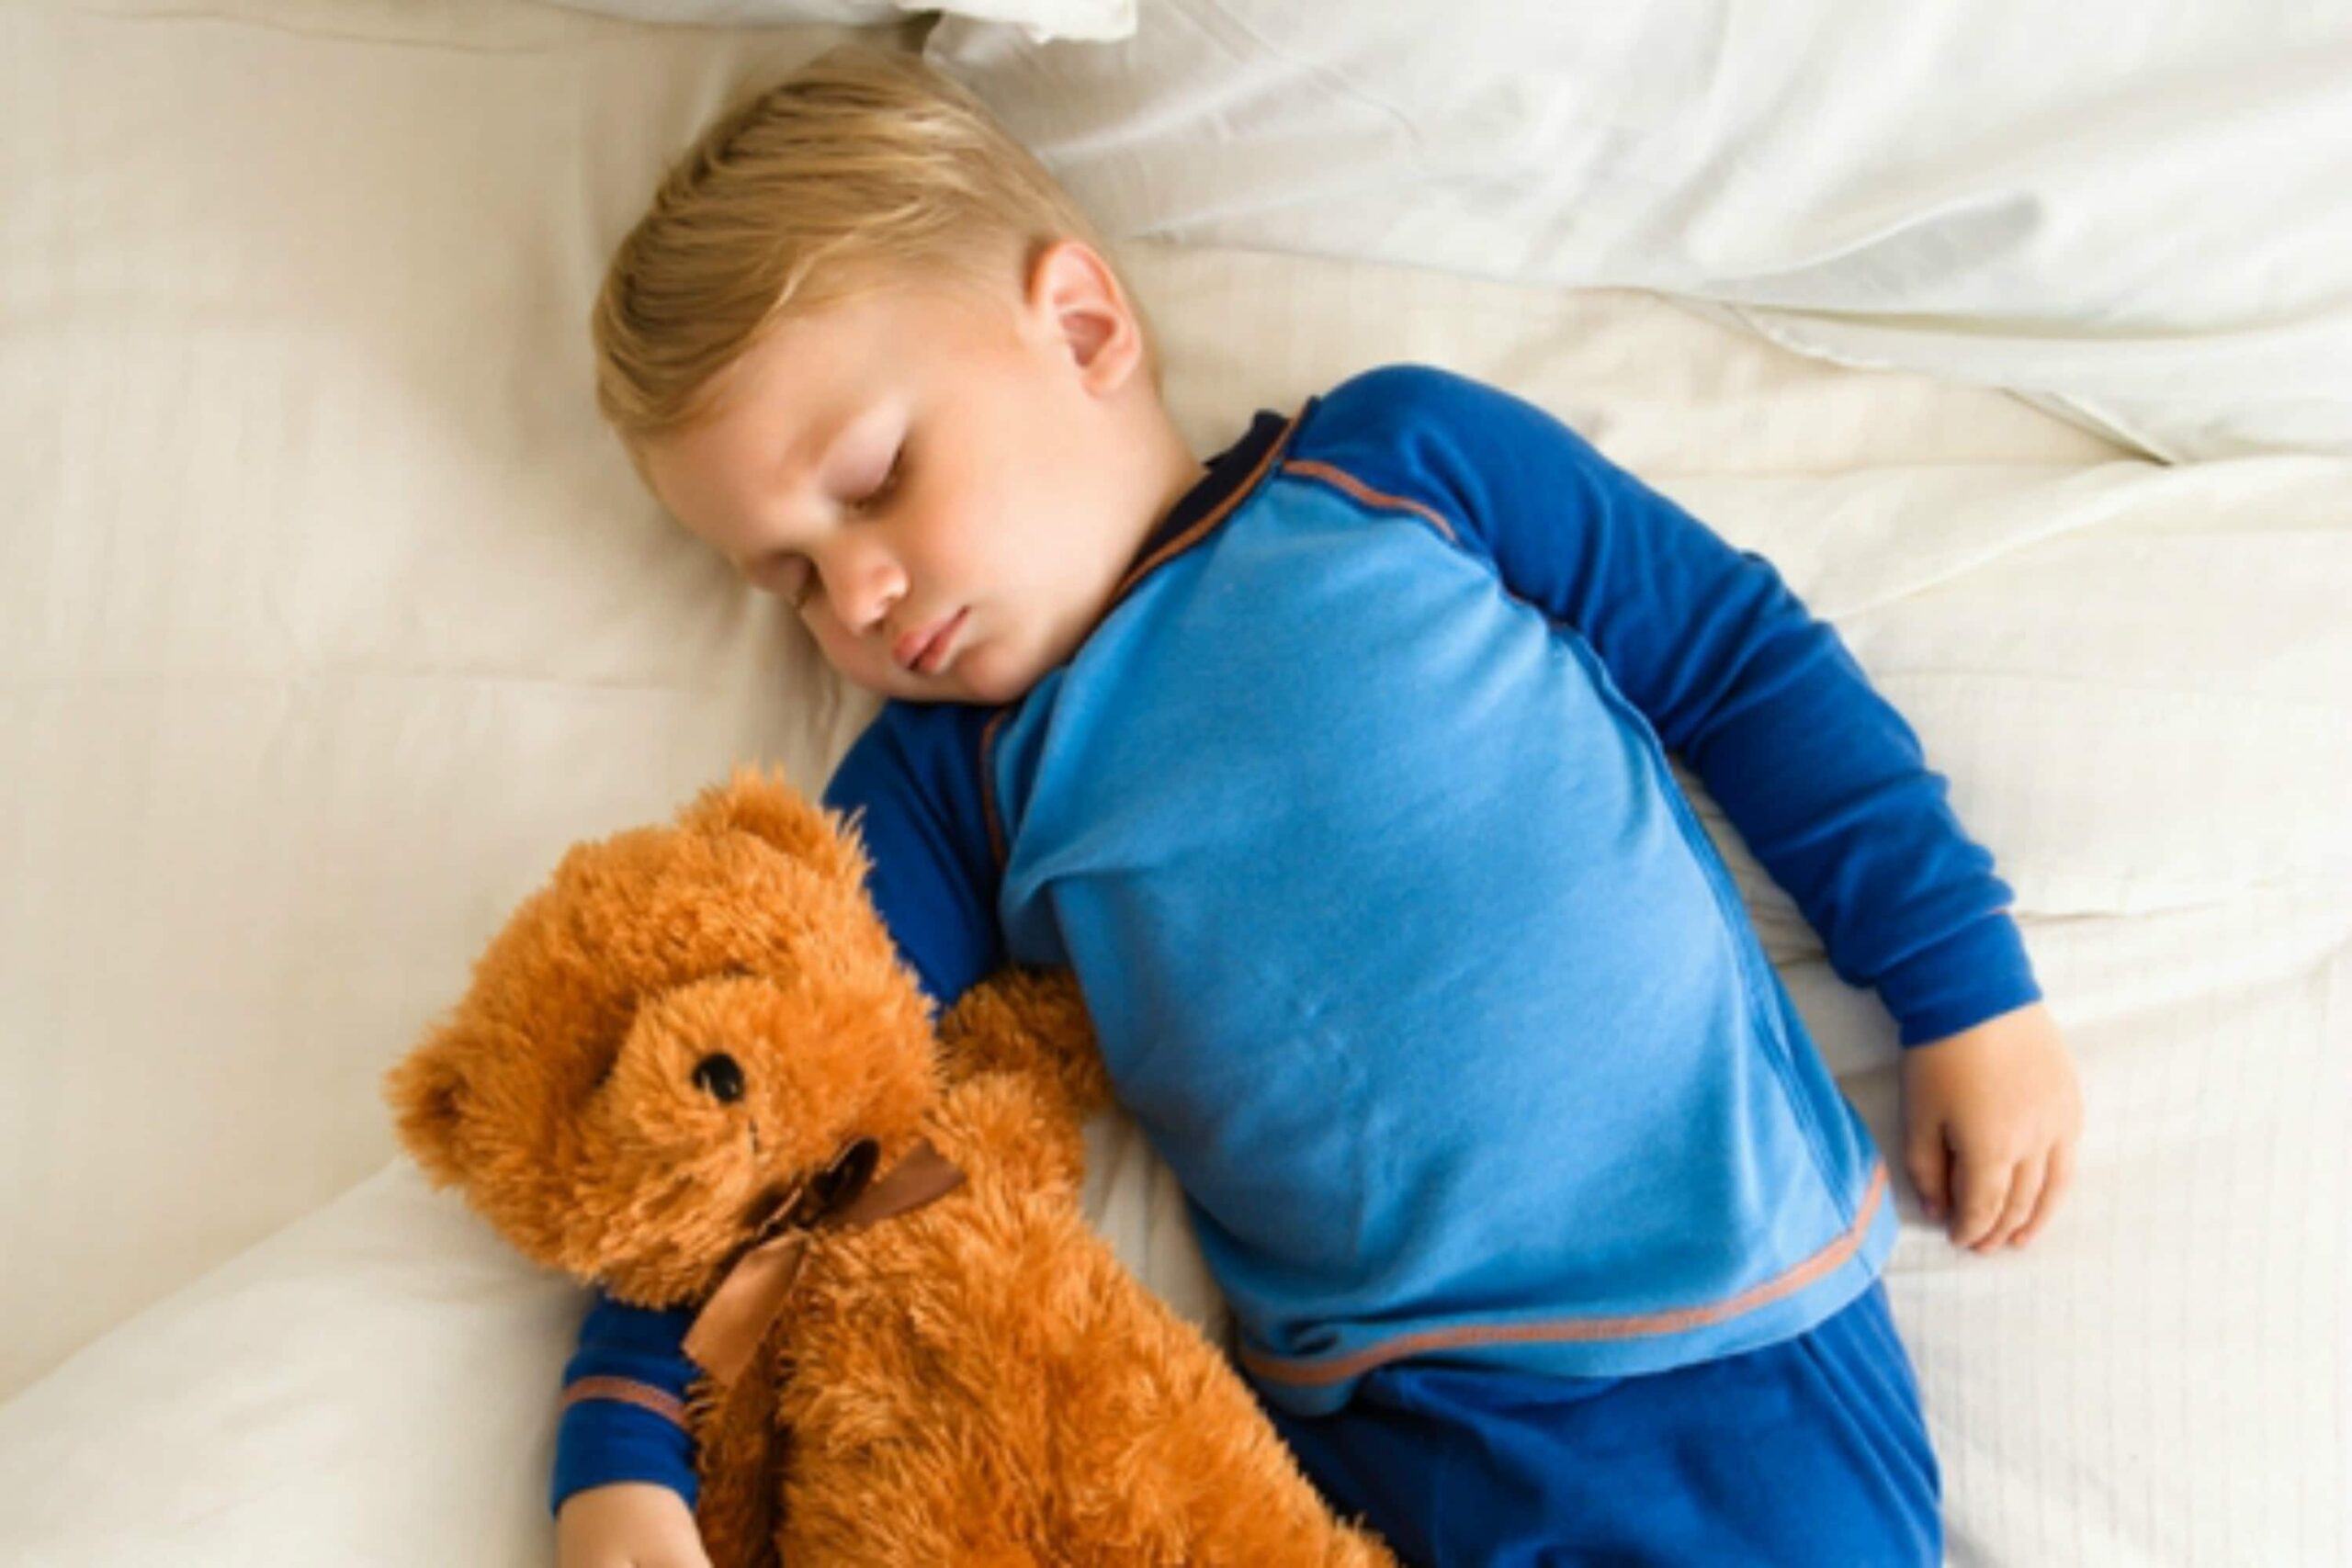 When should your toddler give up their nap? Find out what a sleep consultant says the signs are to look for! Parenting toddlers, toddler sleep, toddler isn't napping, nap tips, sleep tips